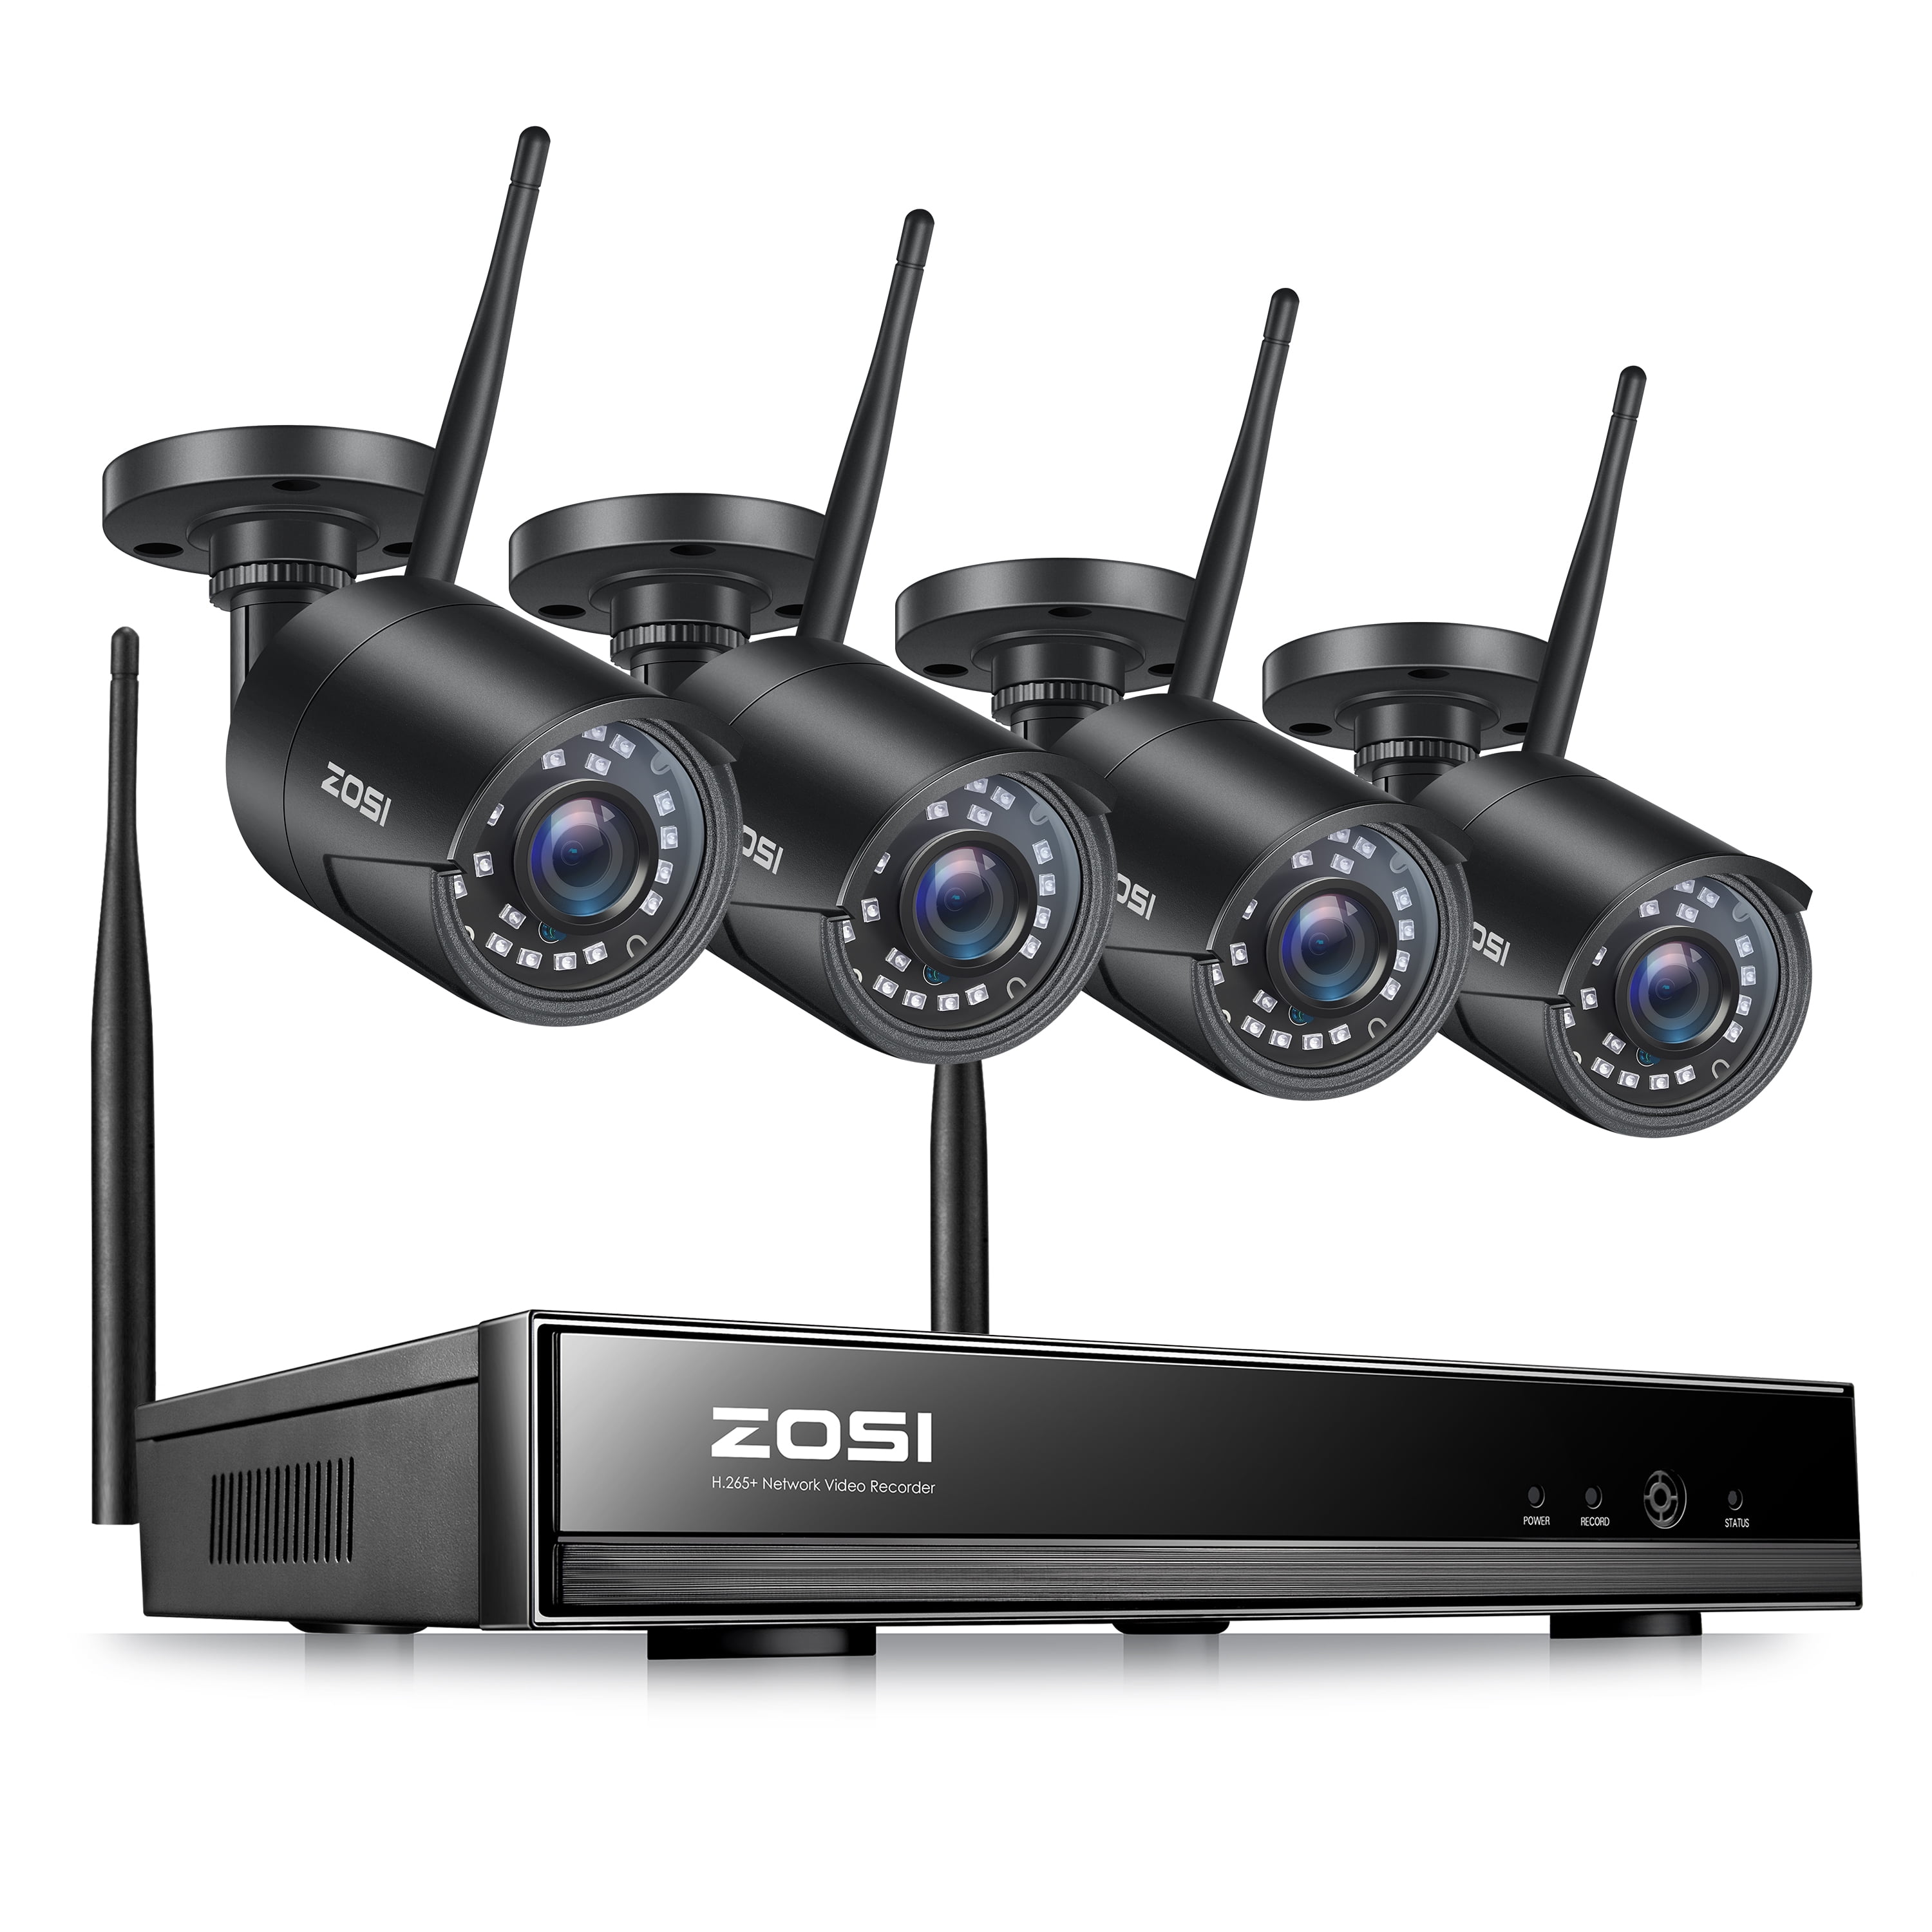 Motion Detection No Hard Drive Included, Only Support ZOSI PoE Camera 24/7 Recording,5MP 2K Video Playback,Remote Control ZOSI H.265+ 5MP 2K Ultra HD 8 Channel PoE NVR Recorder for Home Security 